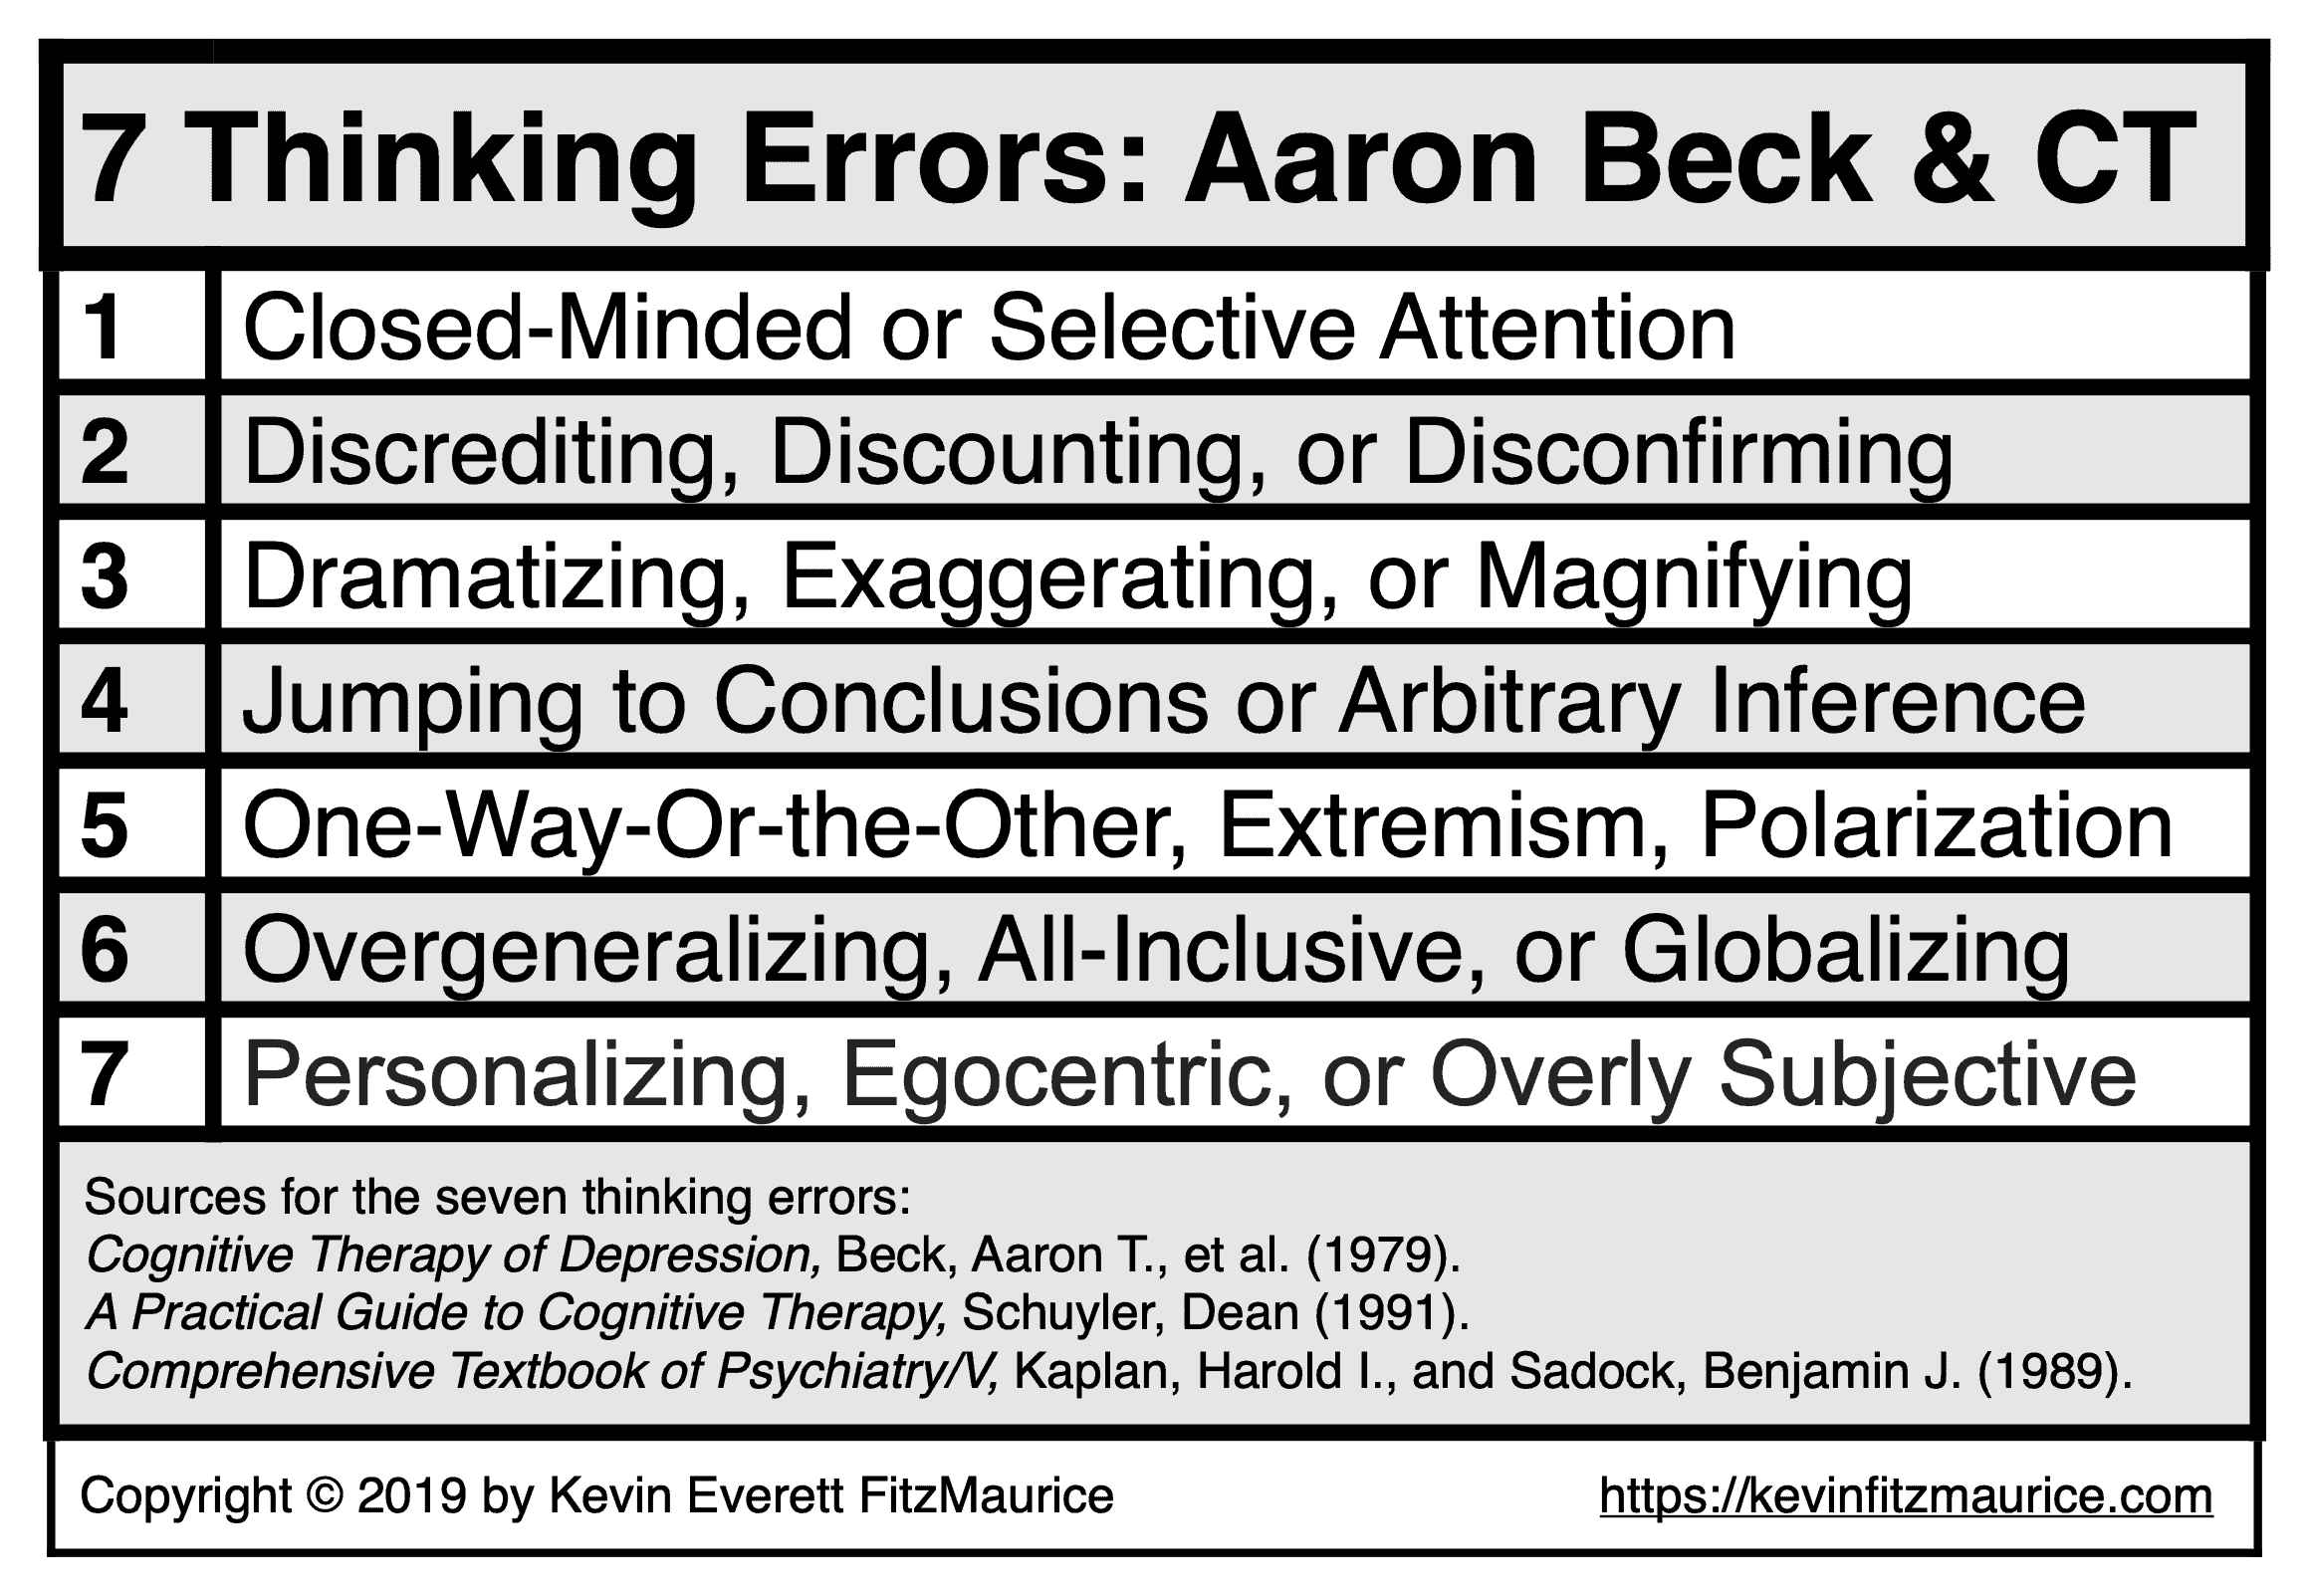 7 Thinking Errors from Aaron Beck & CT